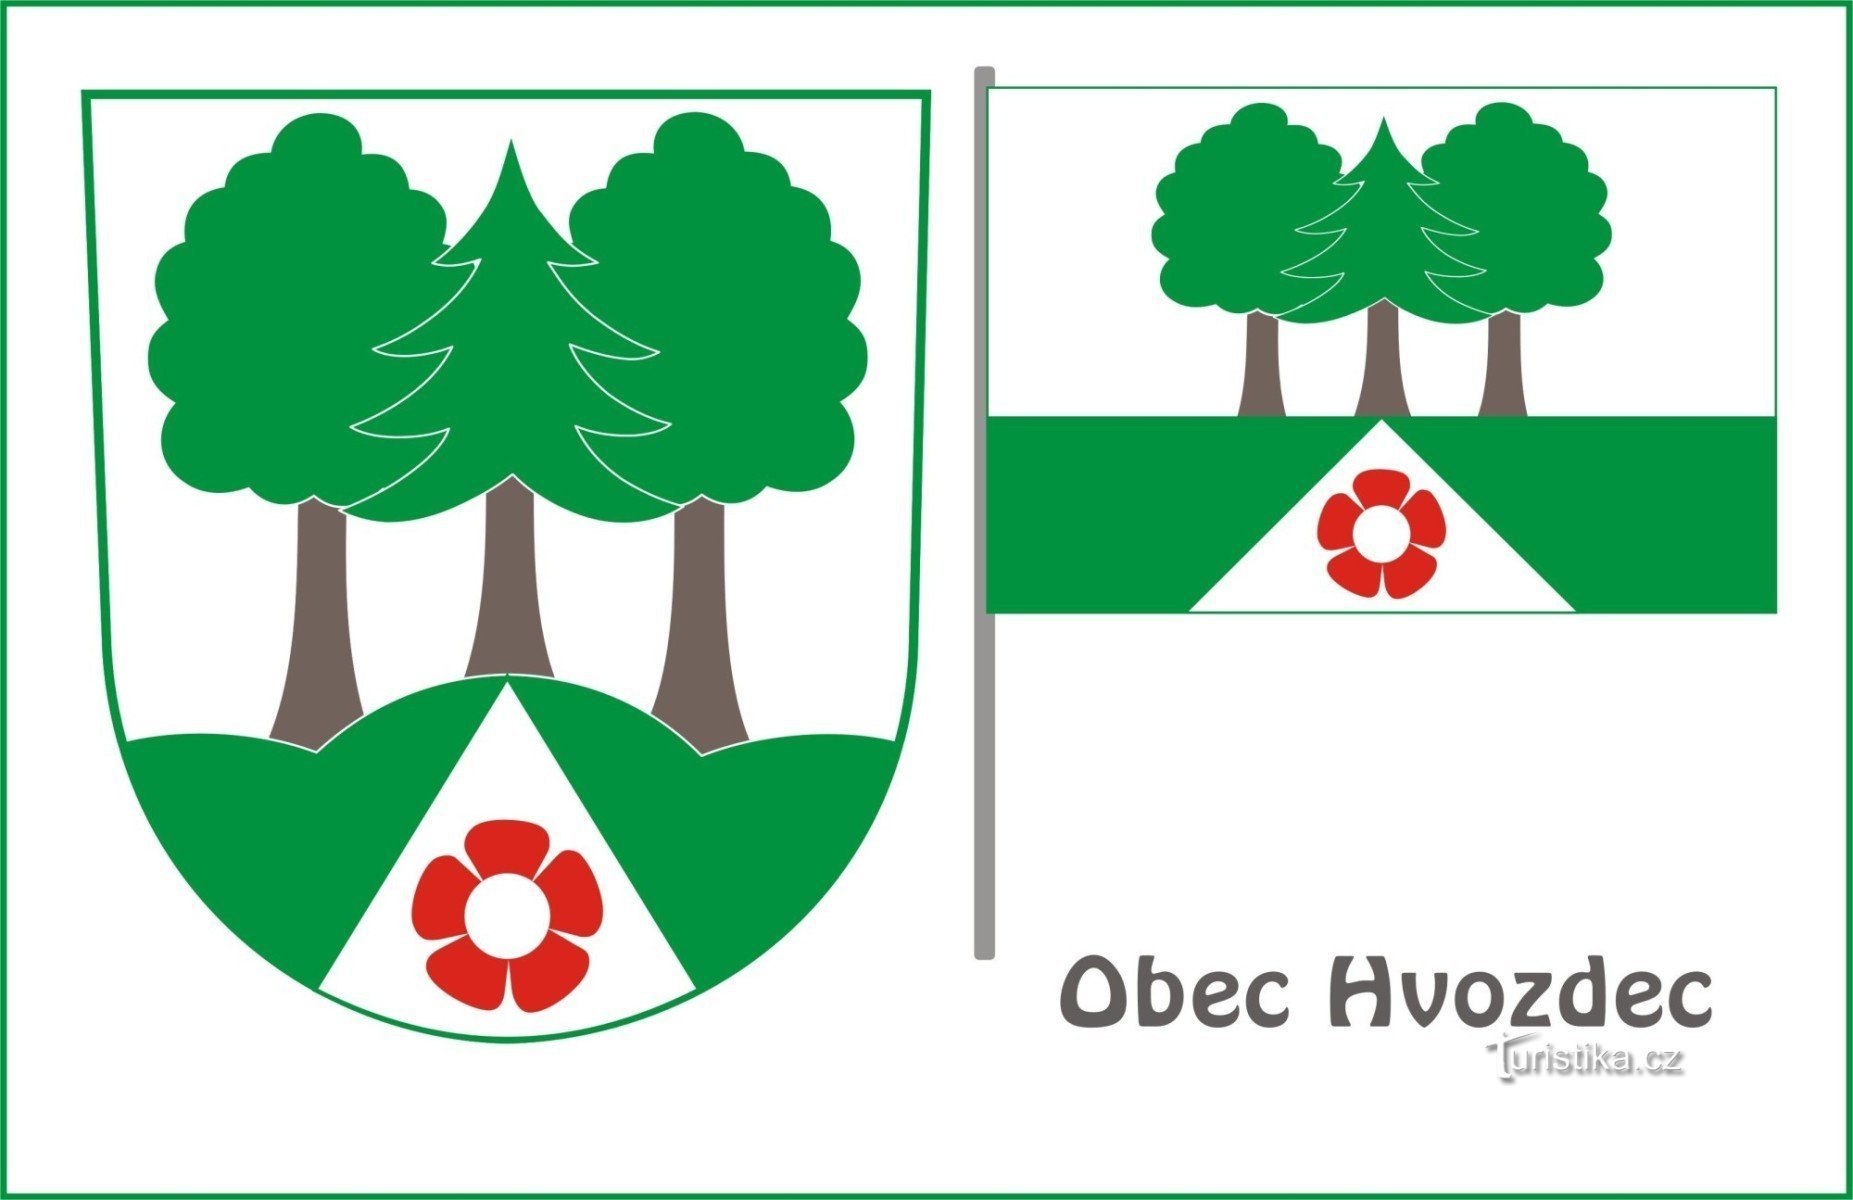 Municipal coat of arms and flag